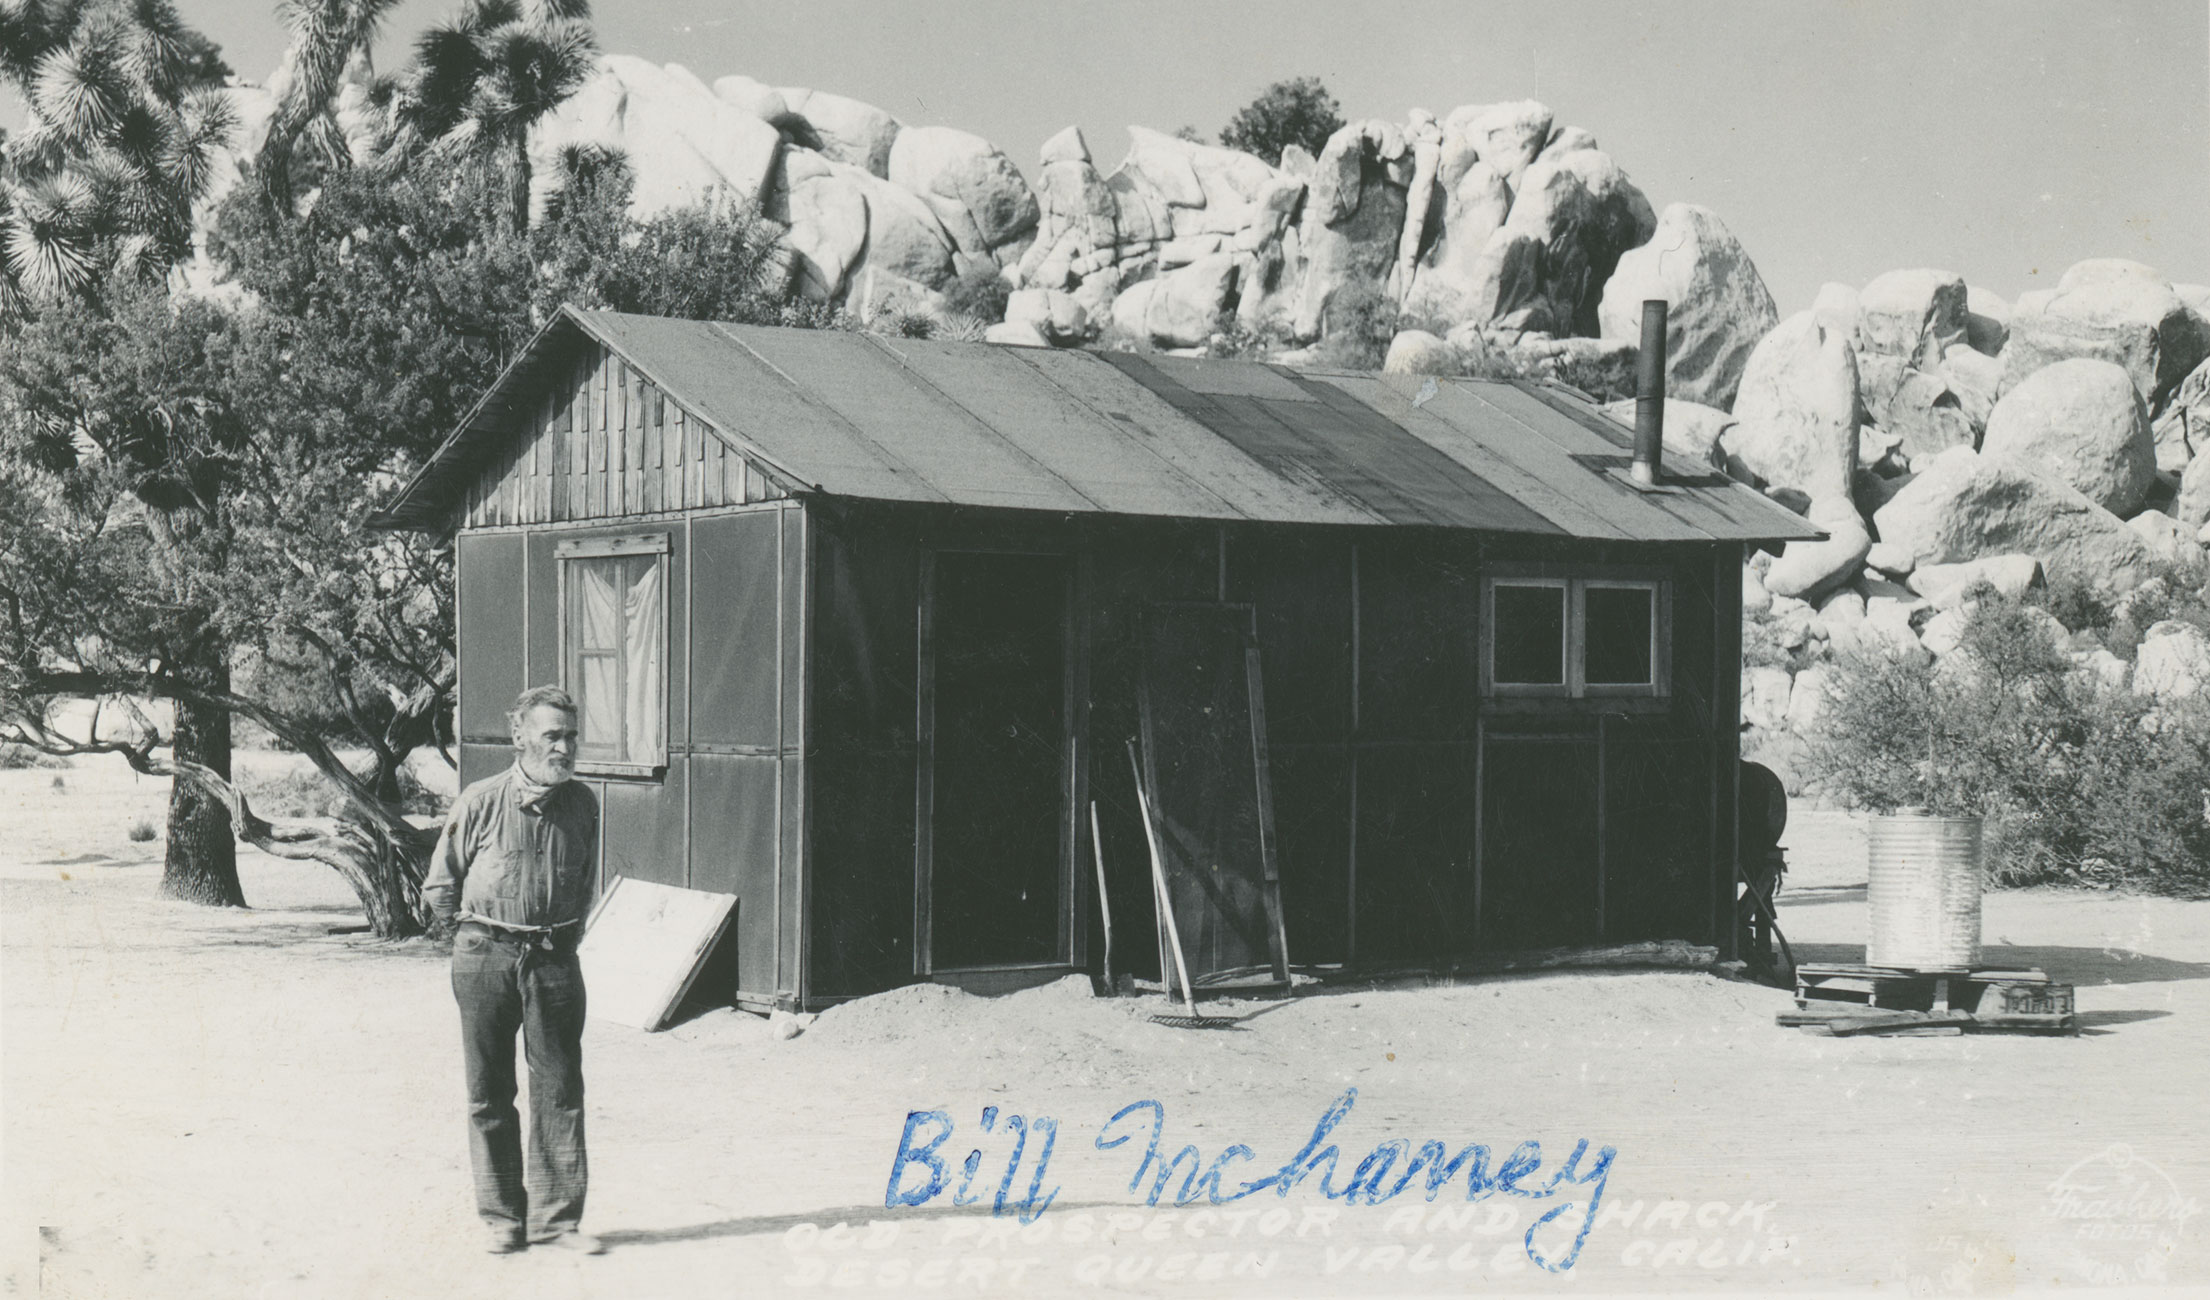 (Bill McHaney in front of cabin)